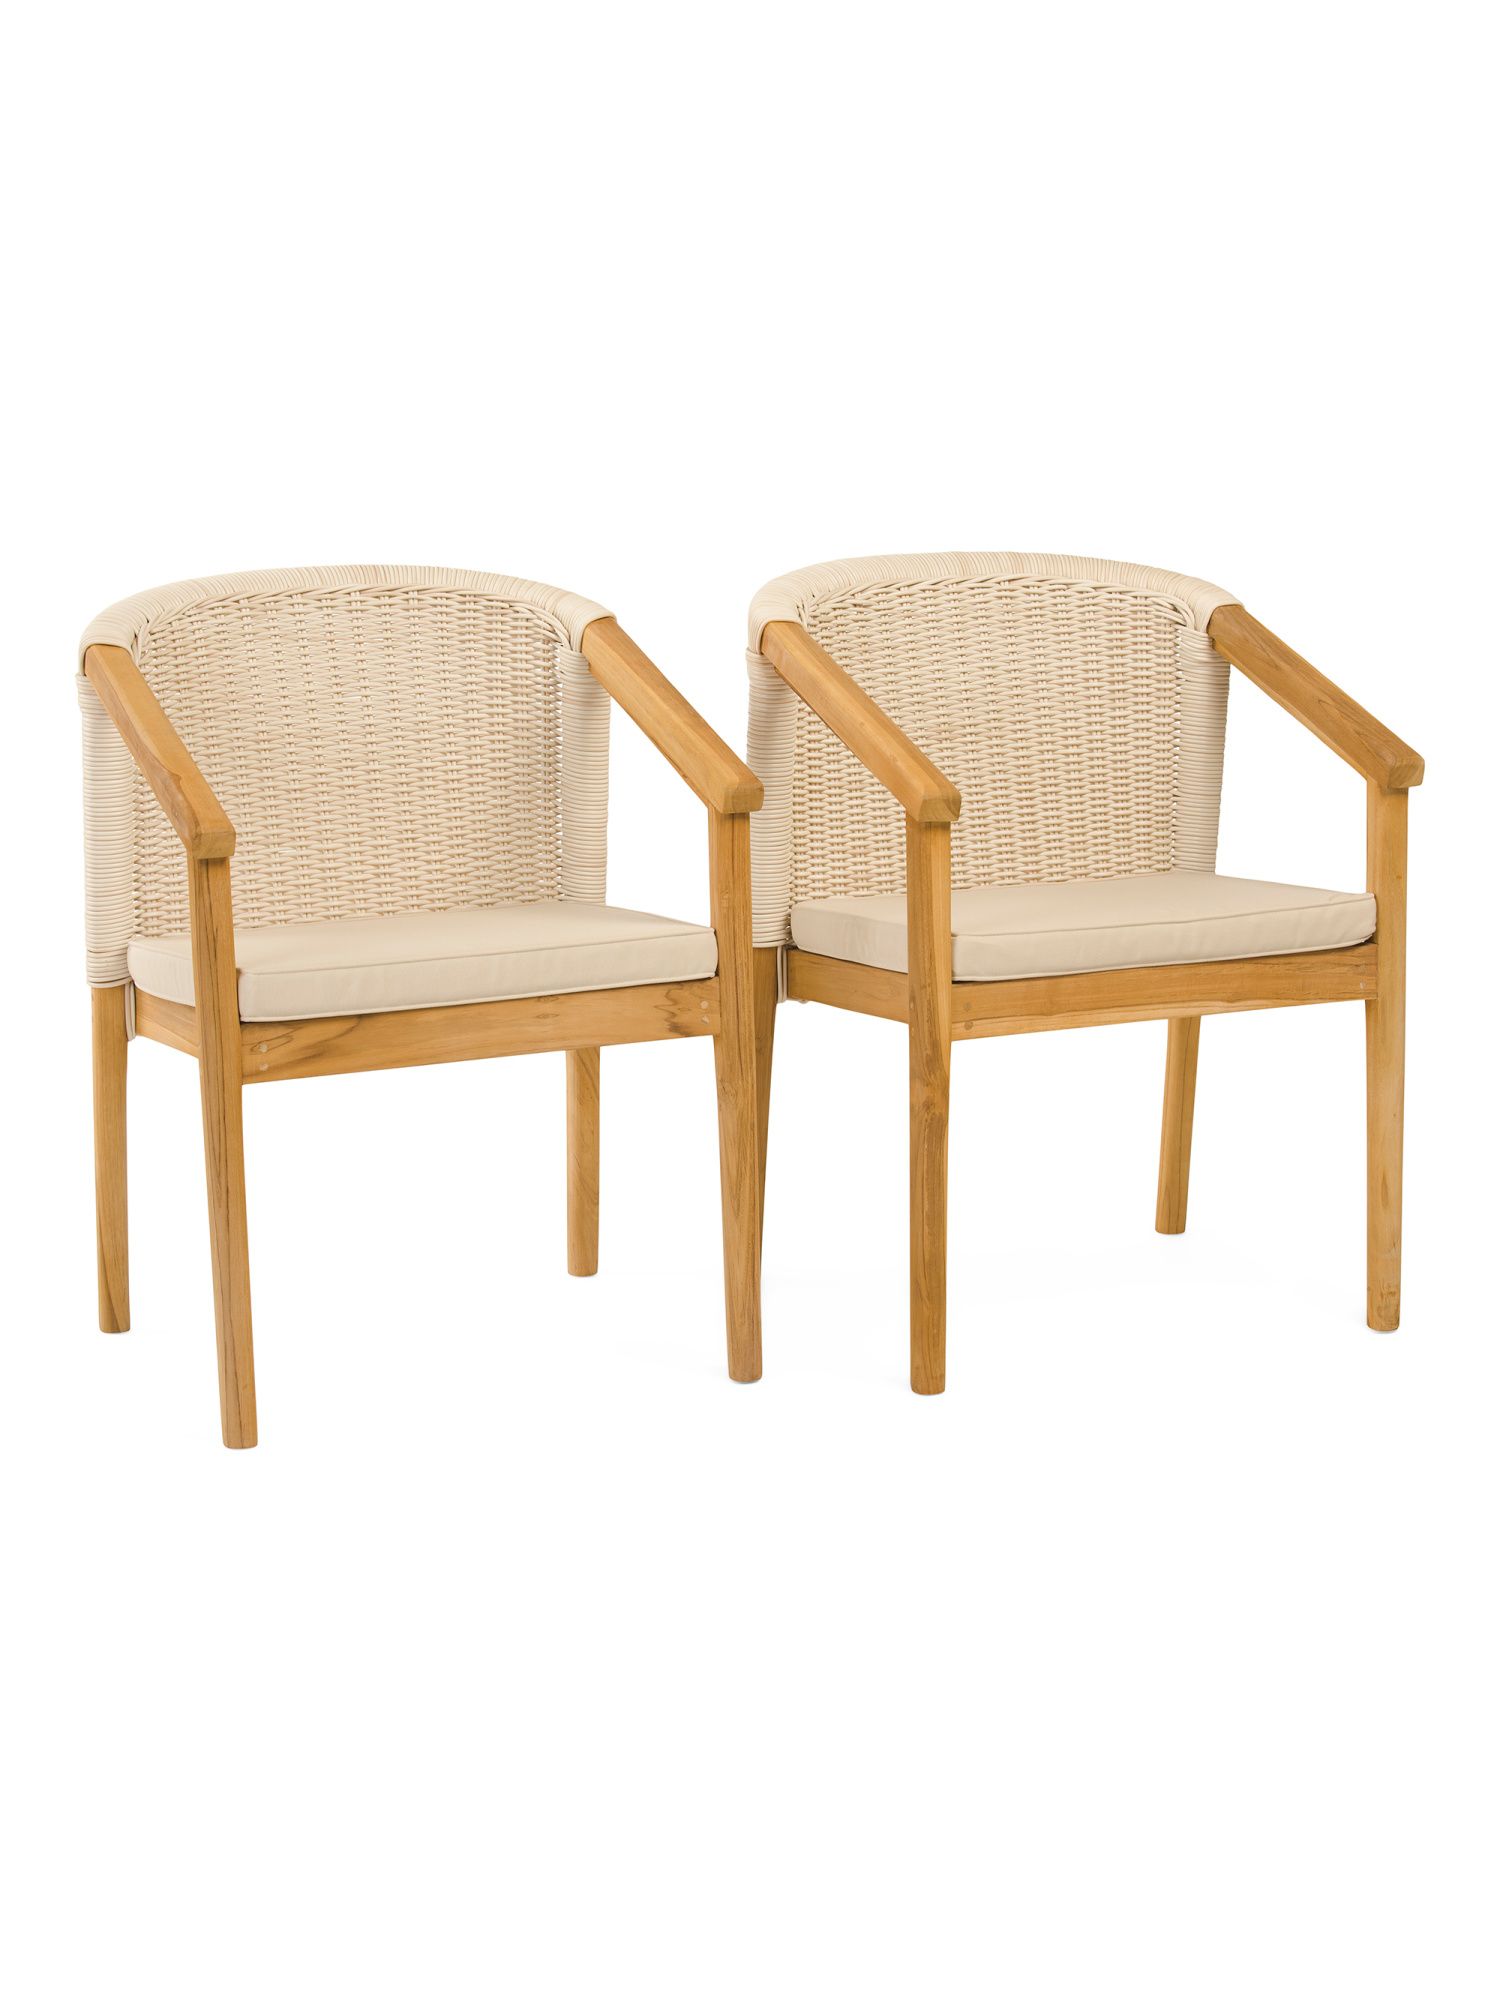 Outdoor Set Of 2 Teak Arm Chairs With Cushions | TJ Maxx